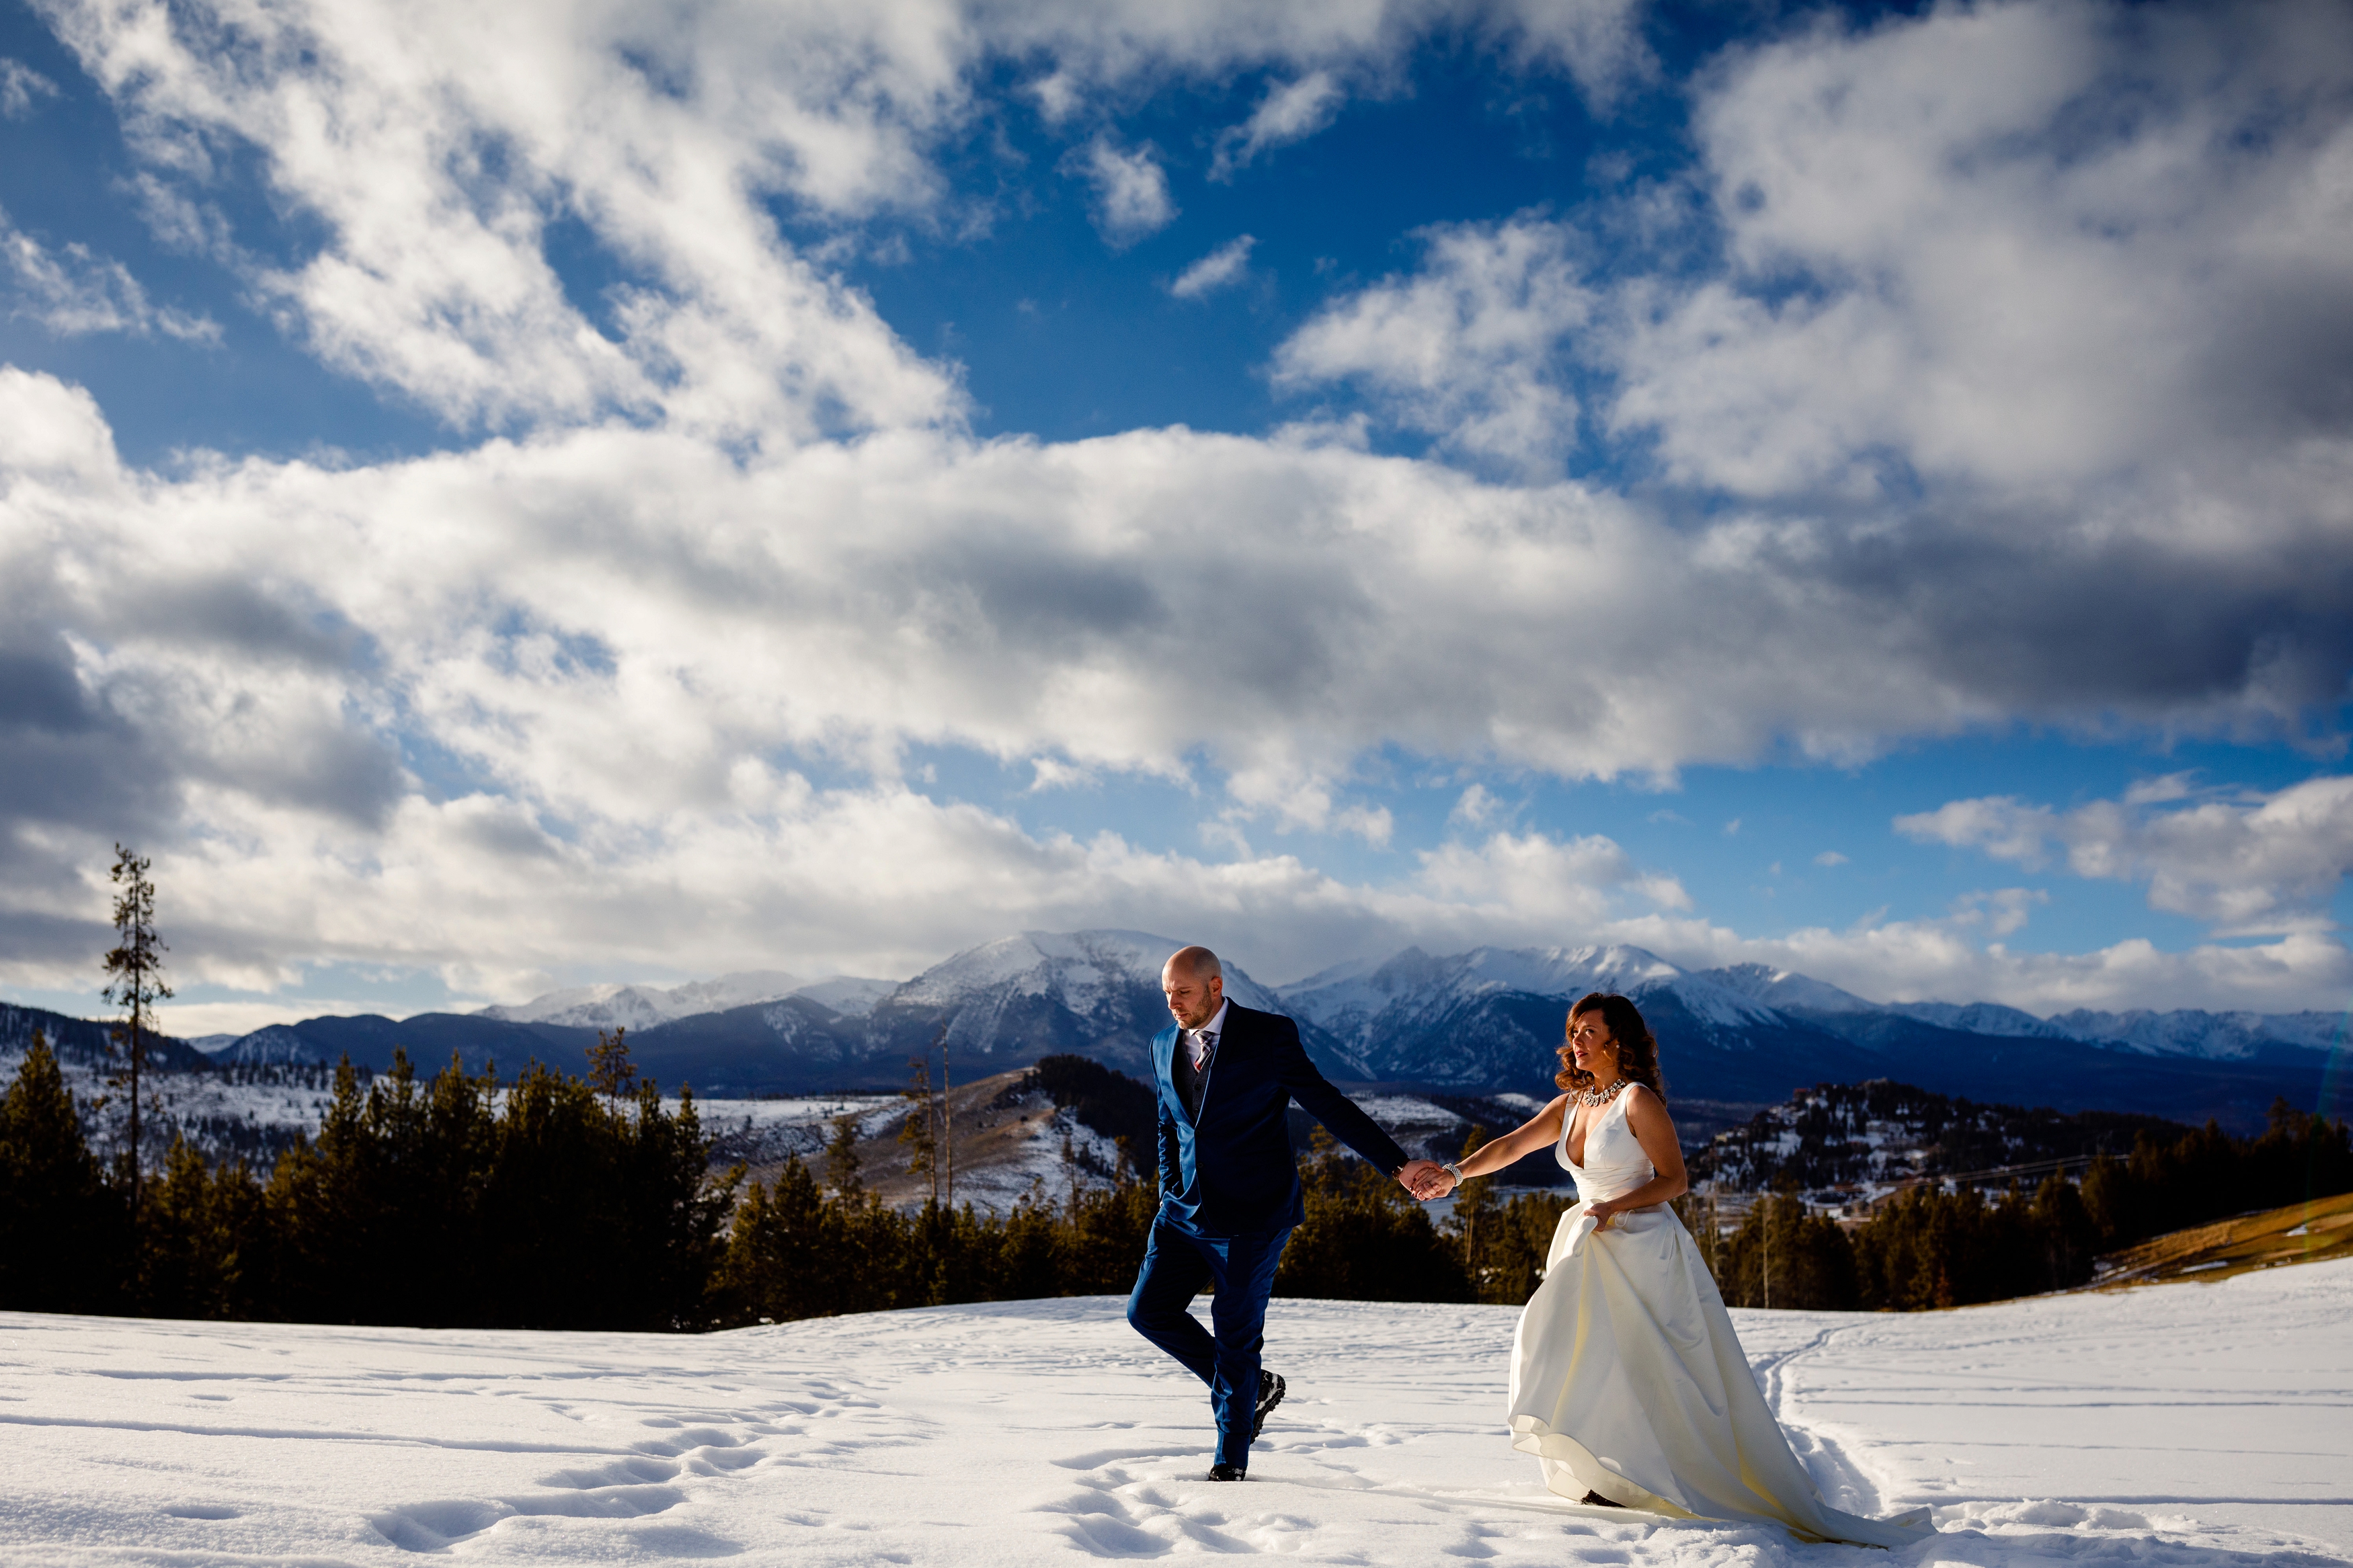 The bride and groom take their first walk together right before their Keystone Ranch Winter Wedding.